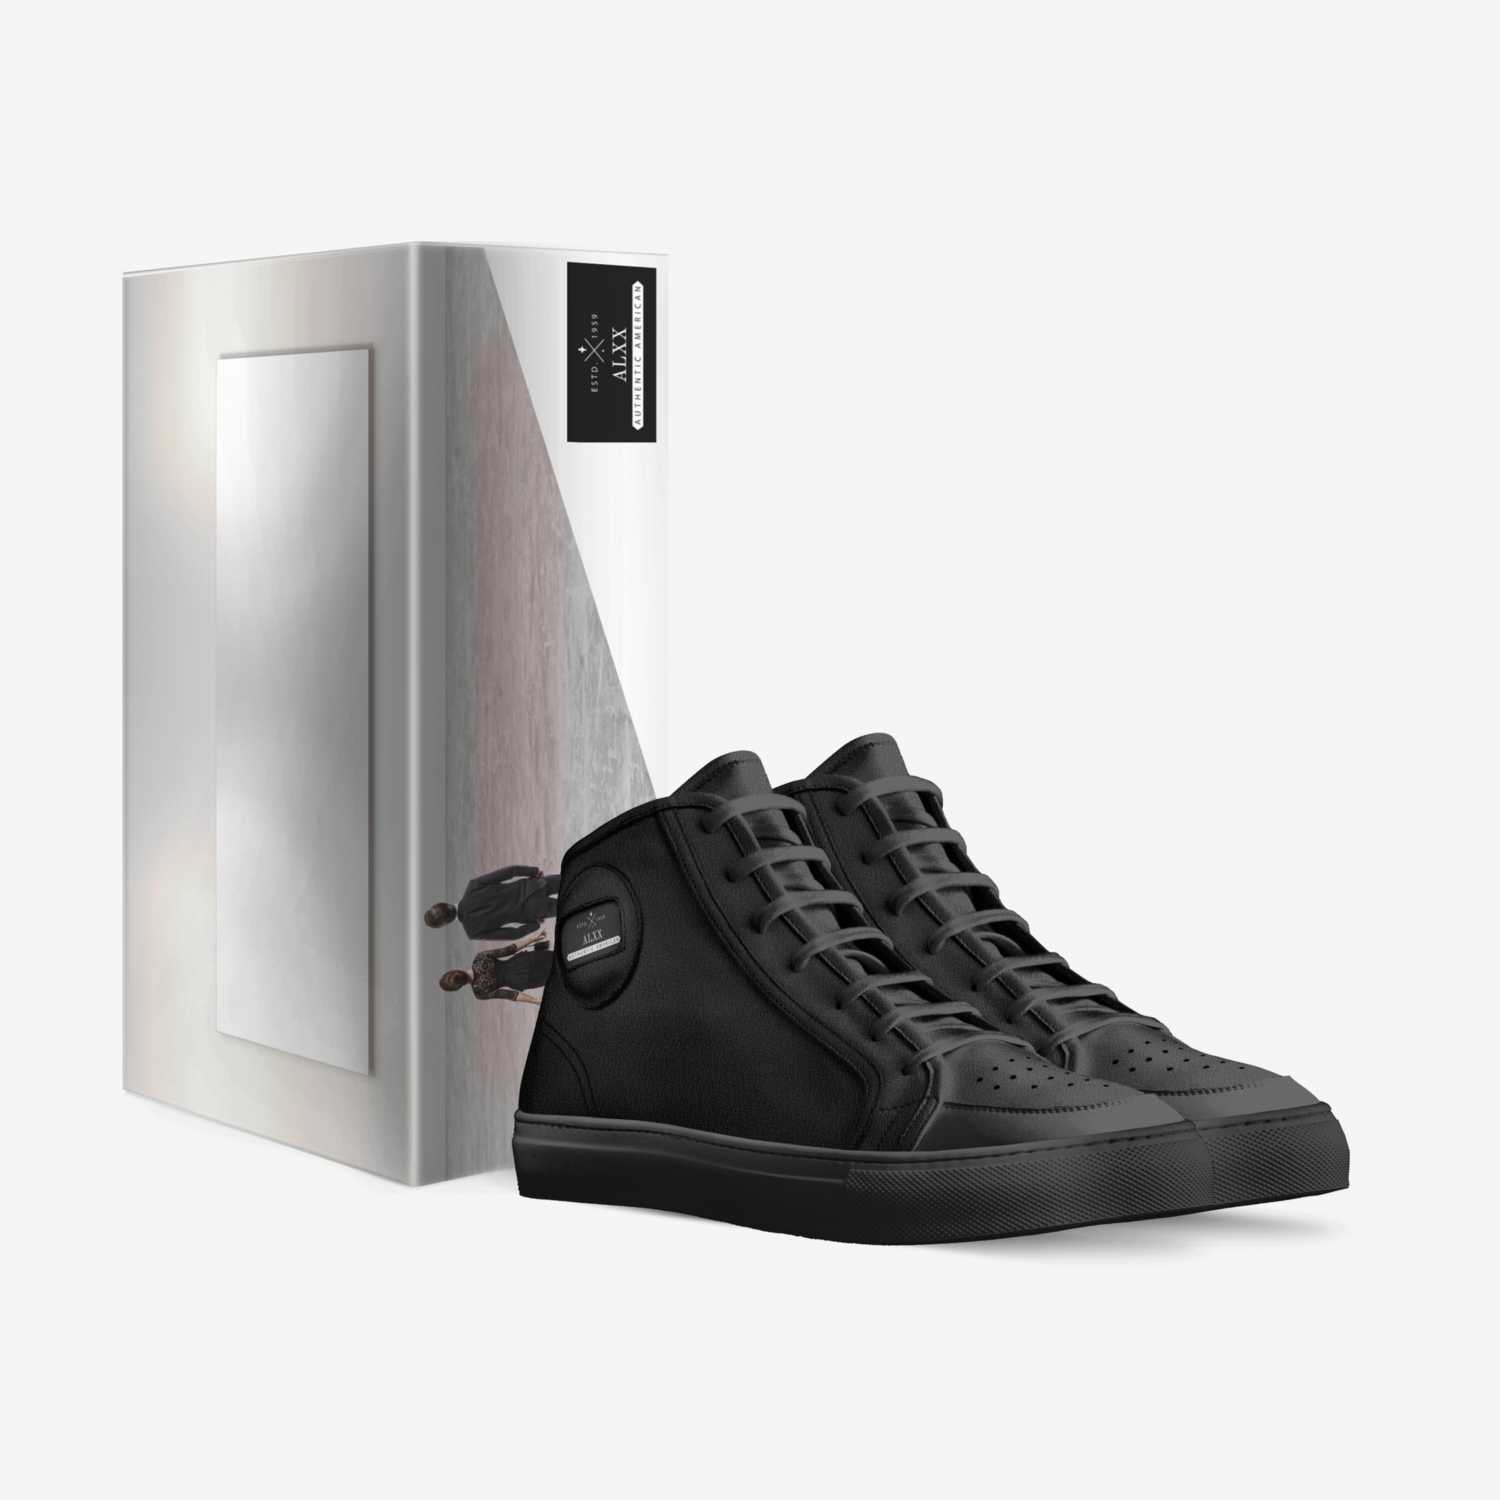 ALXX/Black Jack custom made in Italy shoes by Alexander Bowie | Box view